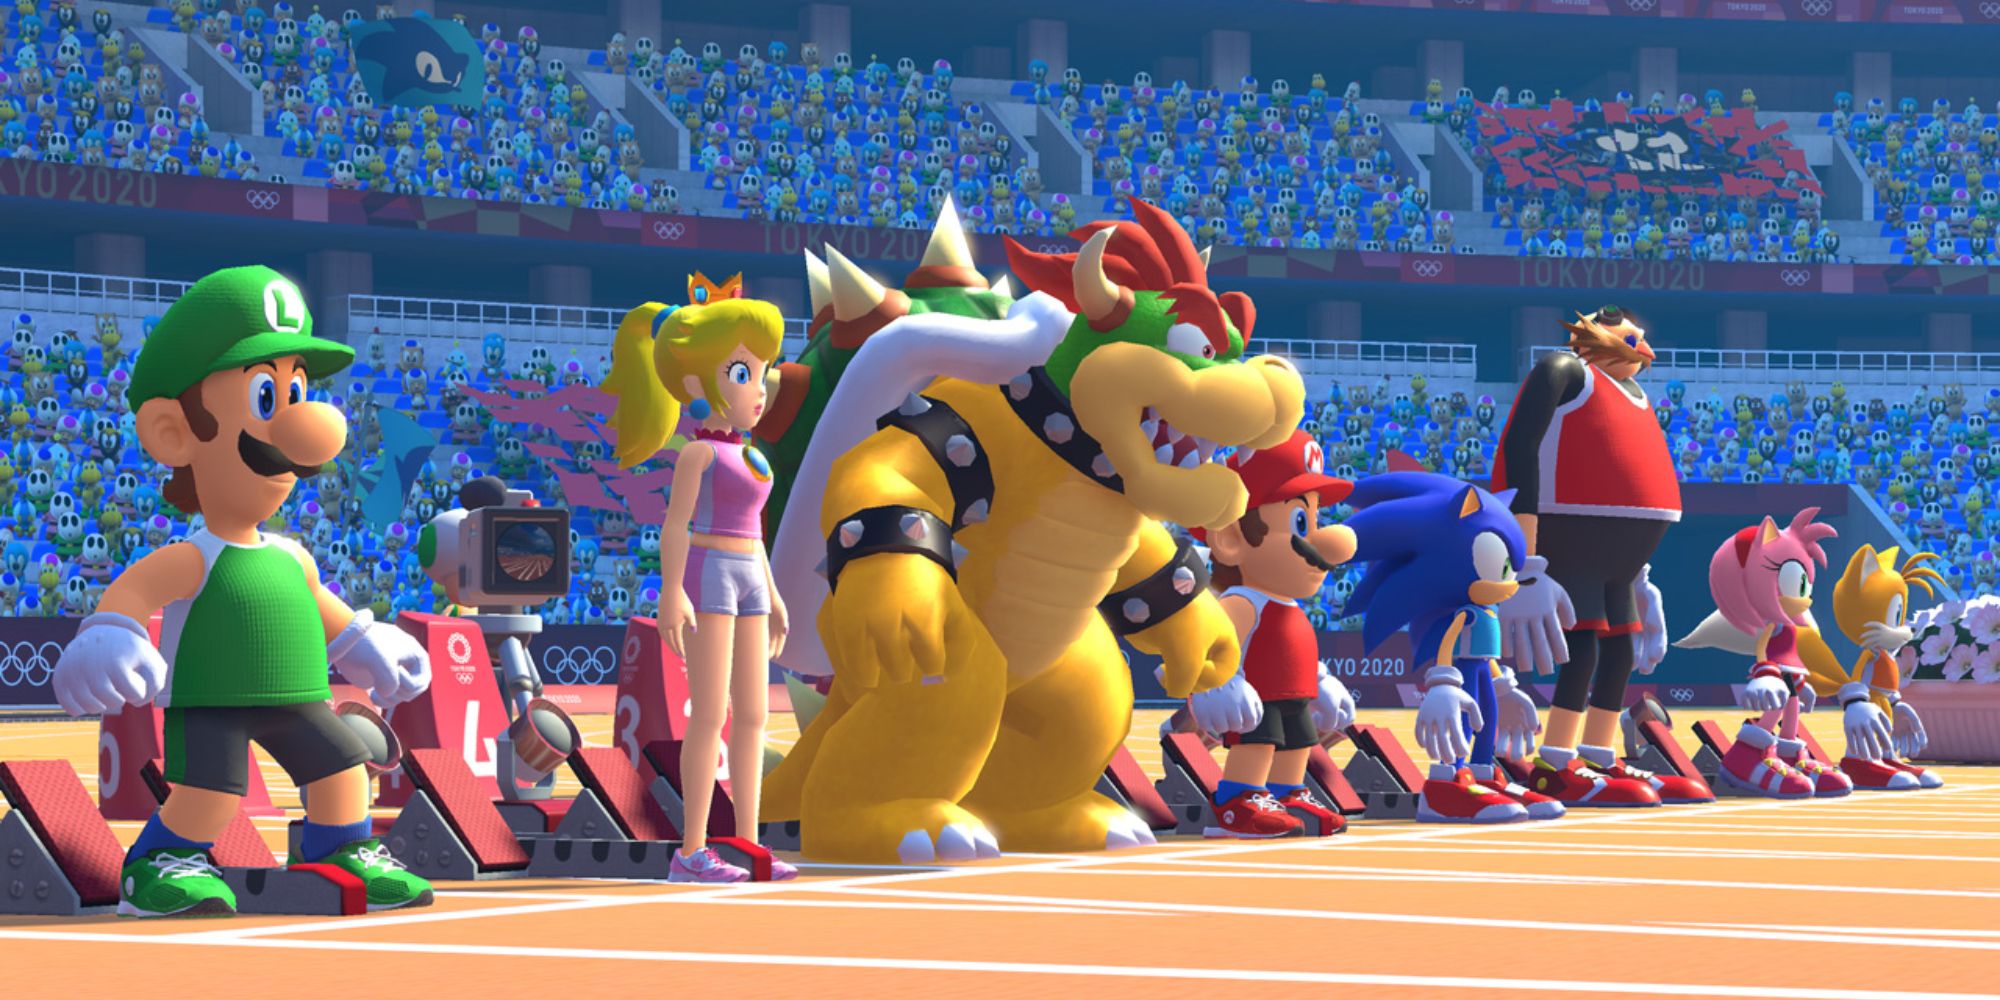 Mario, Sonic, and friends ready for a track run